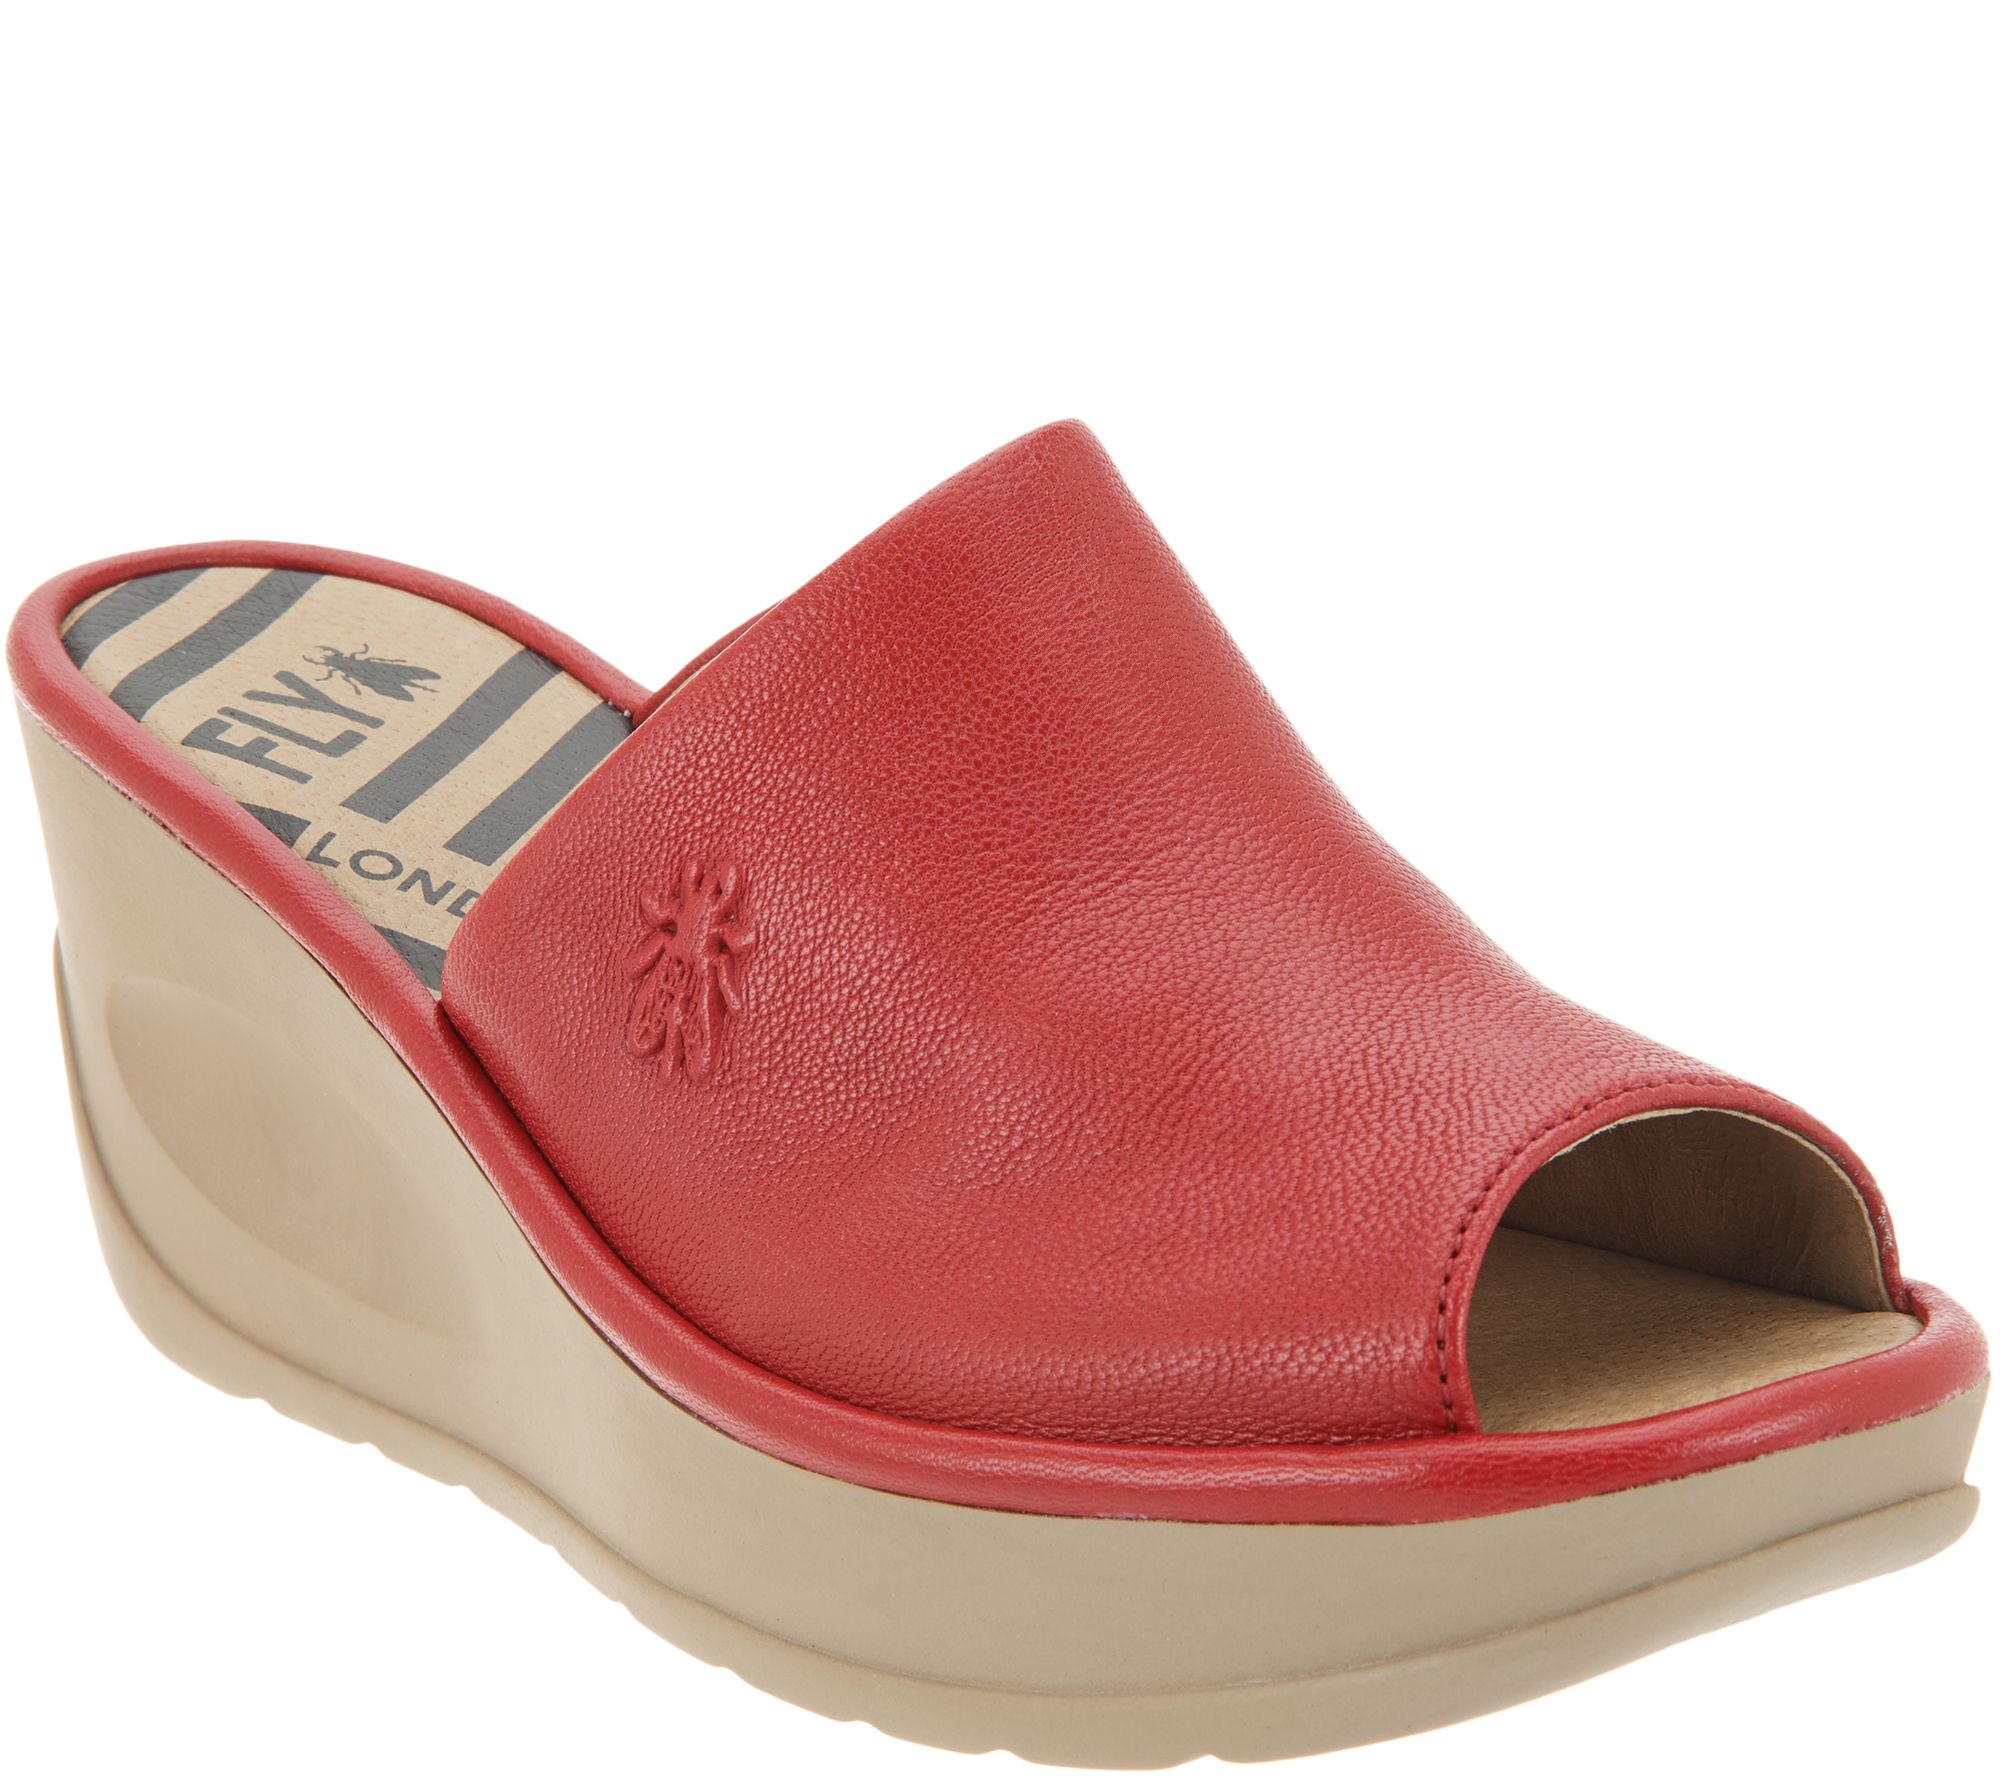 FLY London Leather Slip On Wedges - Jamb - QVC.com